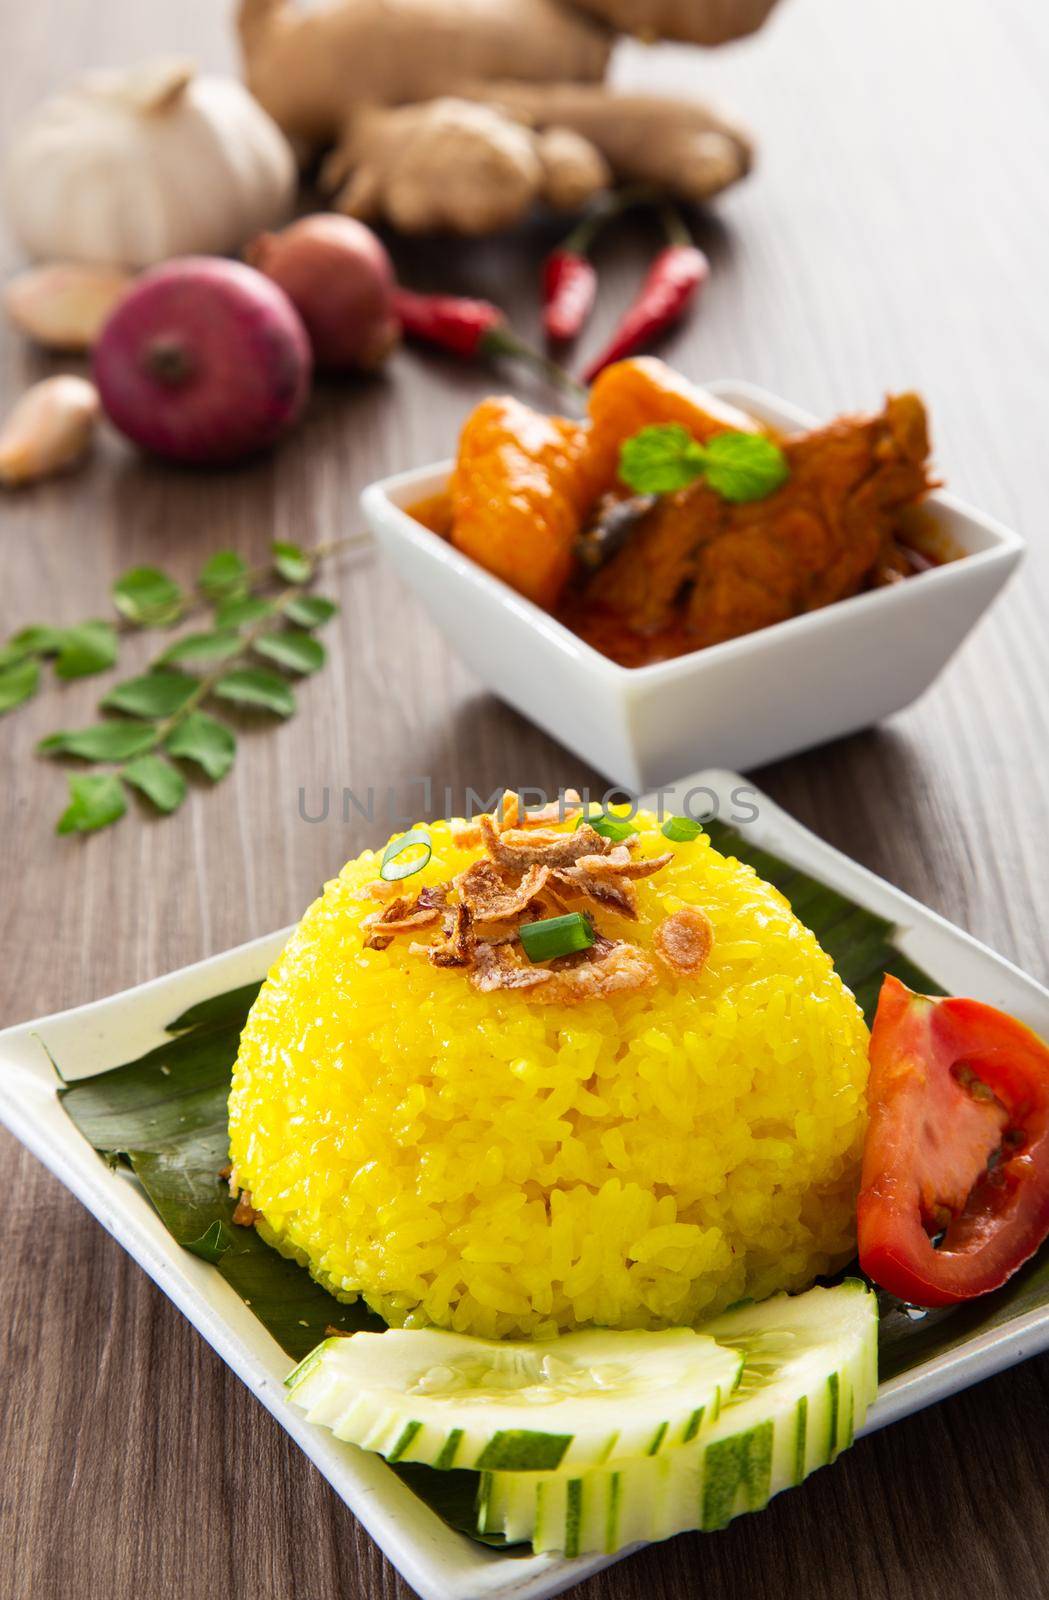 Turmeric Glutinous Rice also known as Nasi Kunyit. Normally eaten with dry curry chicken.